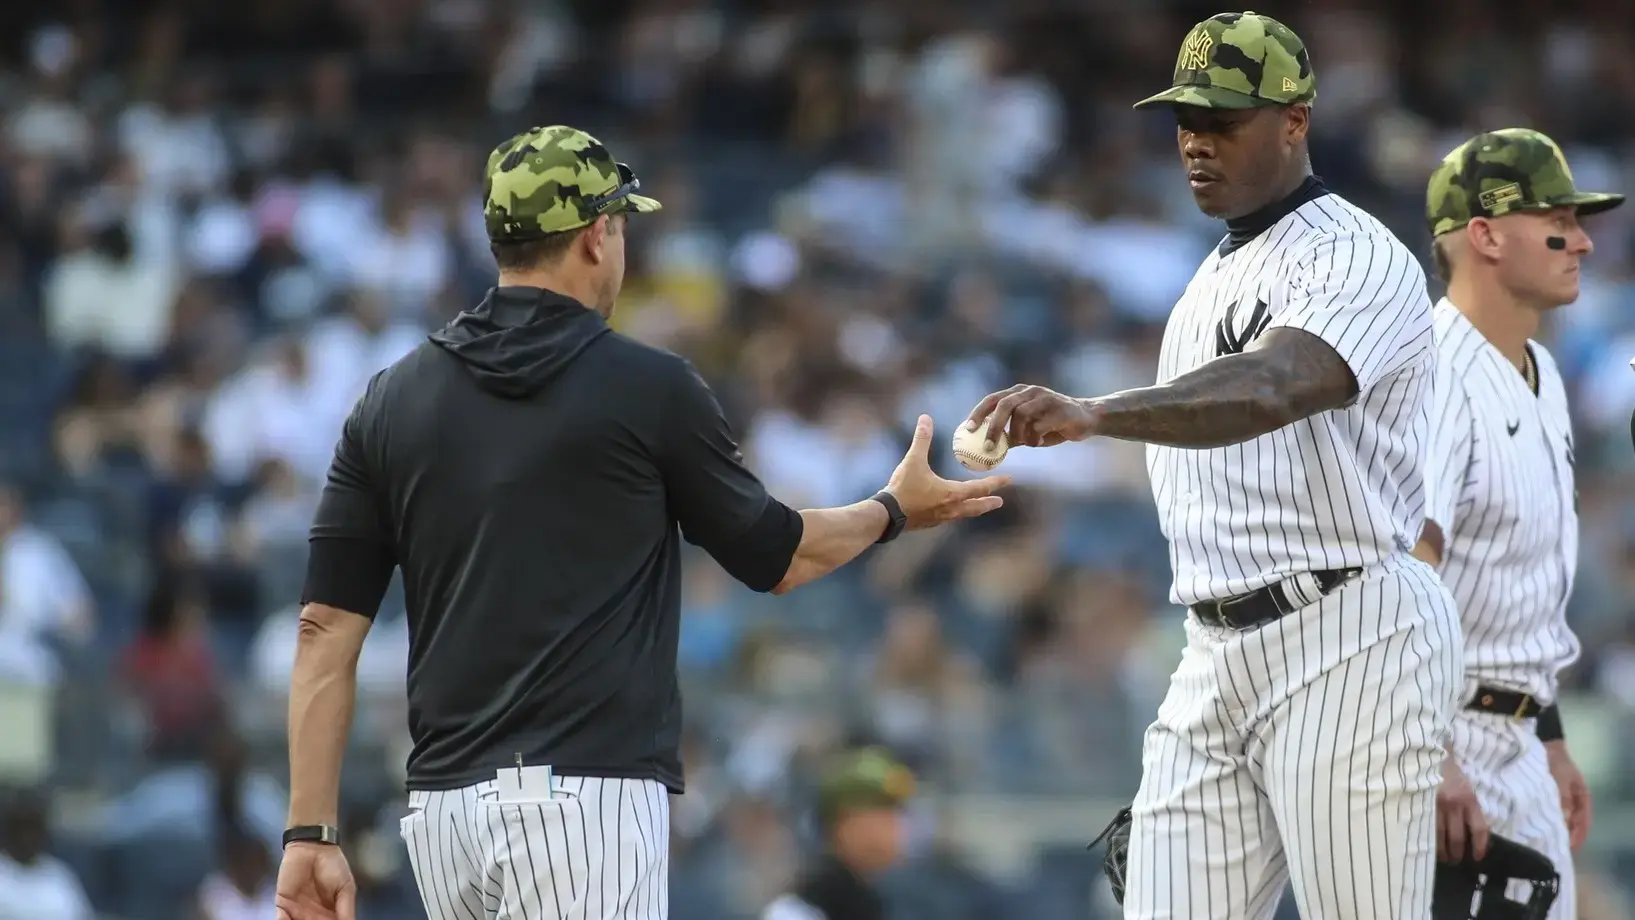 May 22, 2022; Bronx, New York, USA; New York Yankees relief pitcher Aroldis Chapman (54) is taken out by manager Aaron Boone (17) in the ninth inning after blowing the save against the Chicago White Sox at Yankee Stadium. / Wendell Cruz-USA TODAY Sports